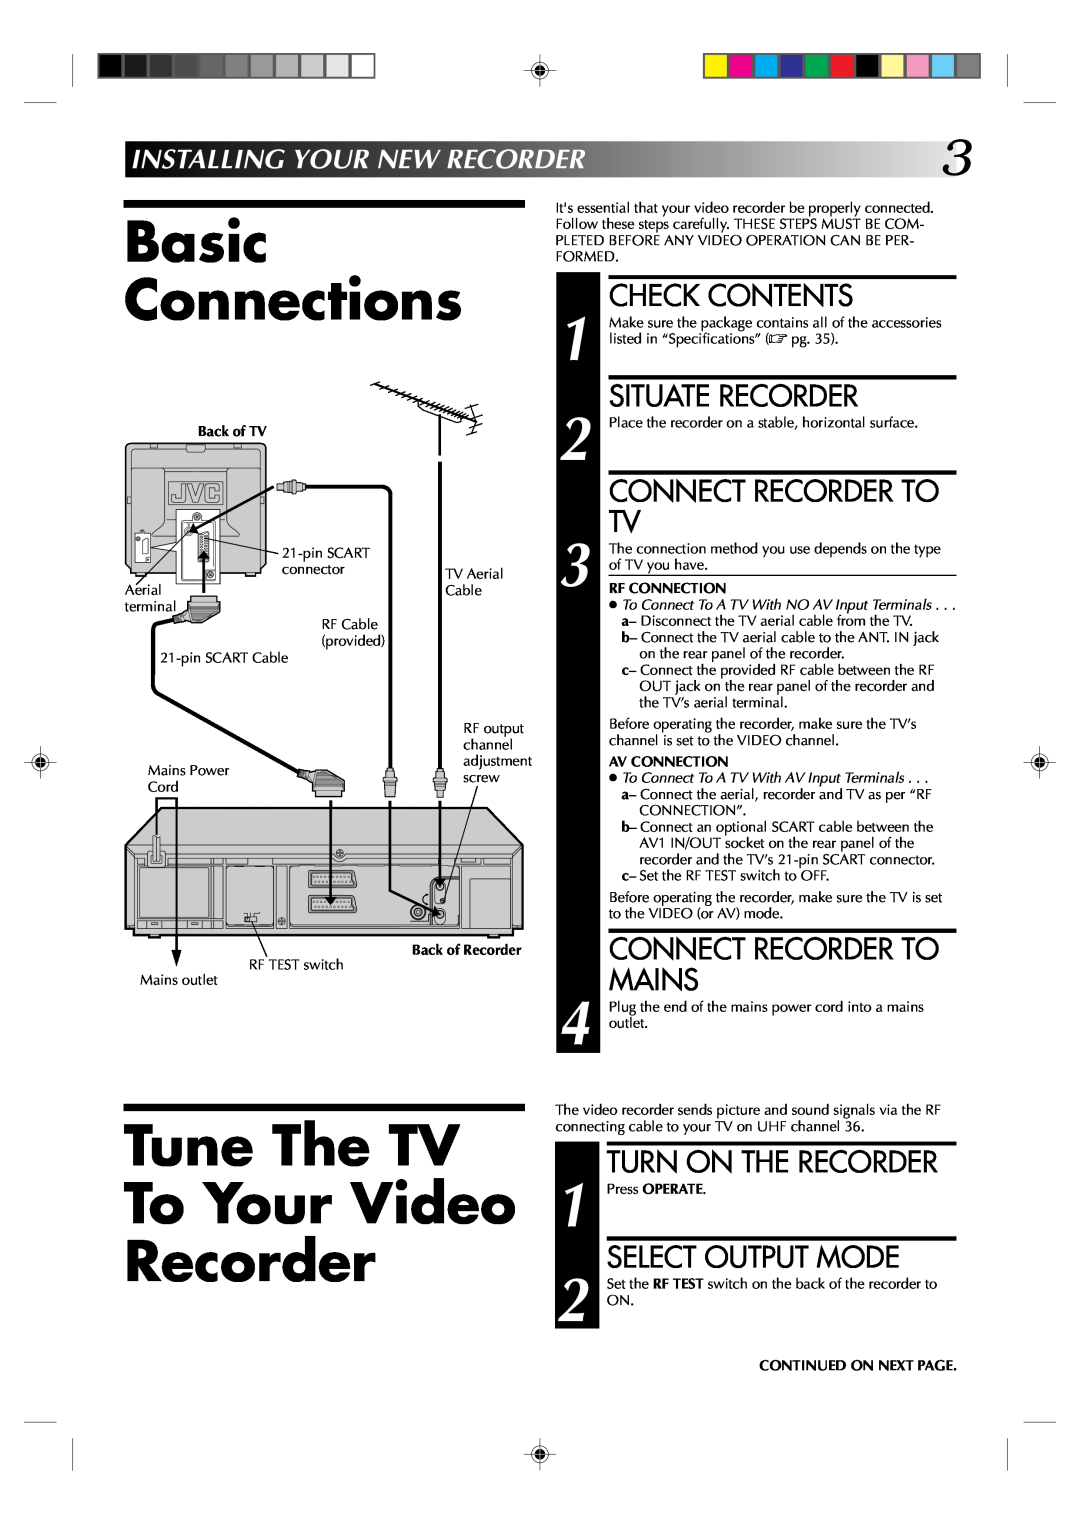 JVC HR-J238E Basic Connections, Tune The TV To Your Video Recorder, Connect Recorder To, Installingyournewrecorder 